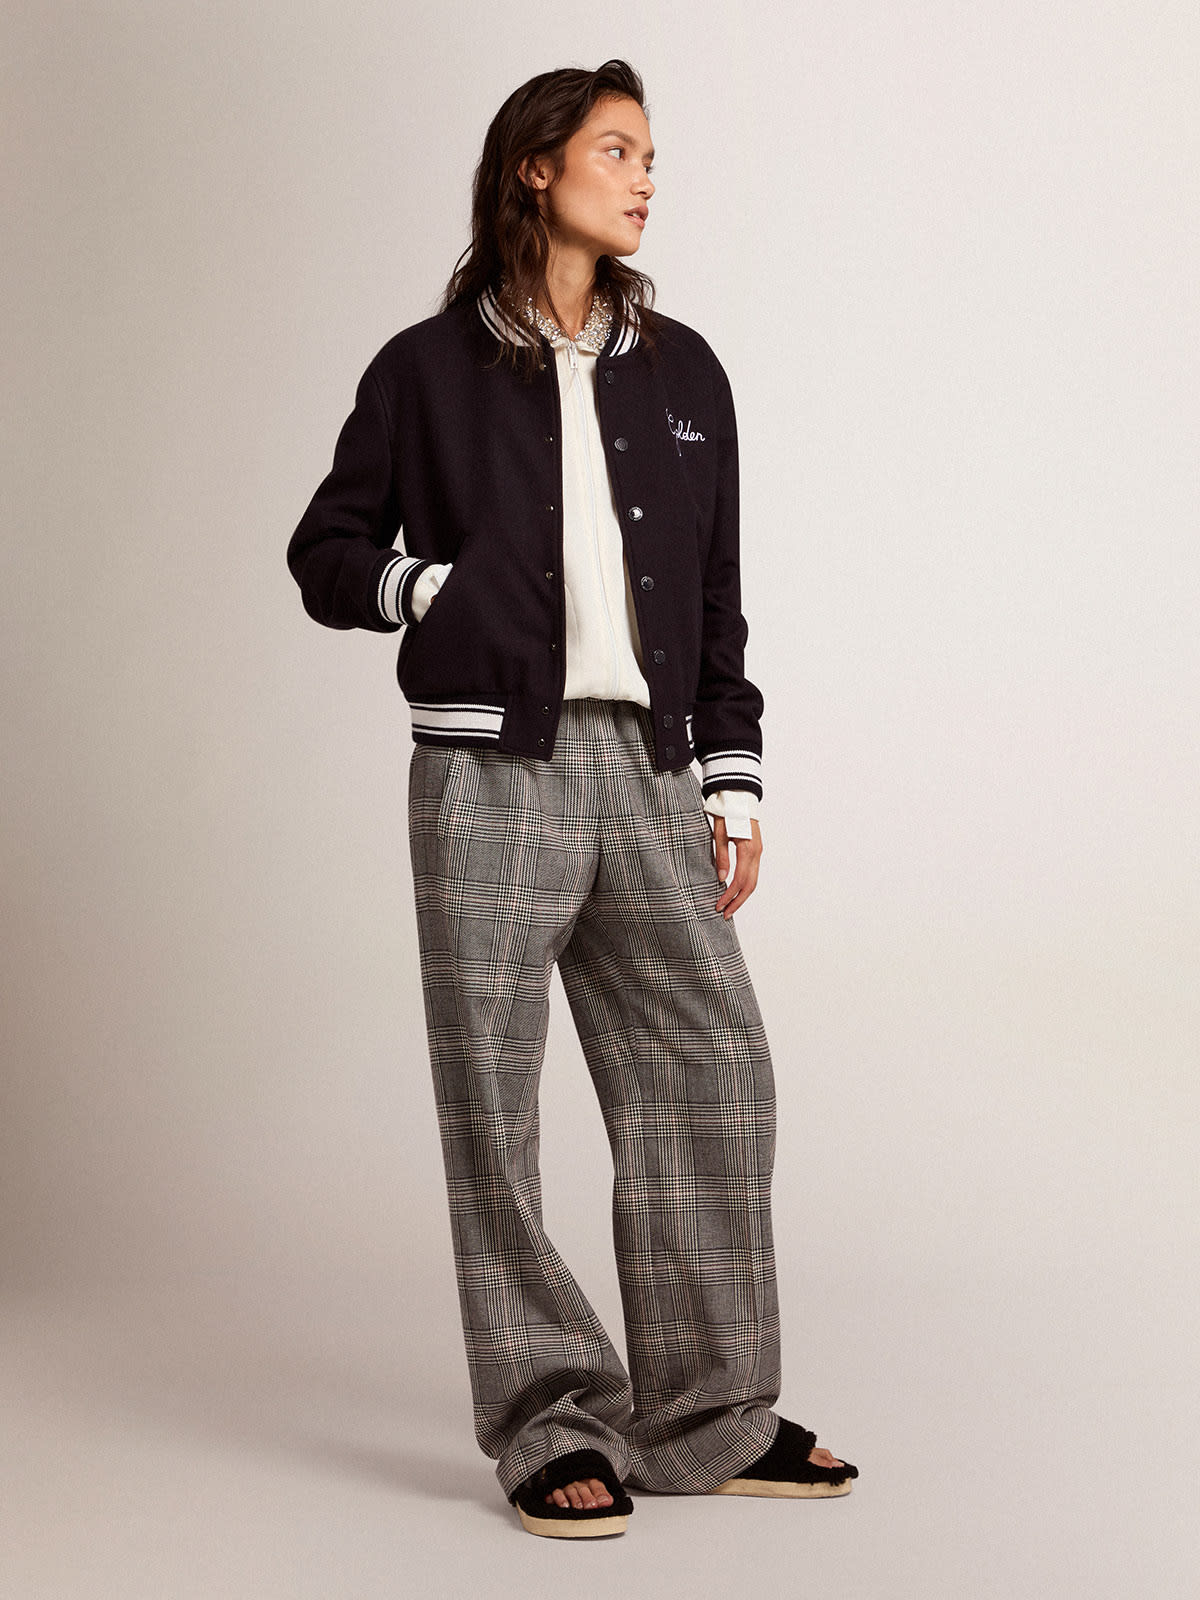 Golden Goose - Women's joggers in gray and white Prince of Wales check in 